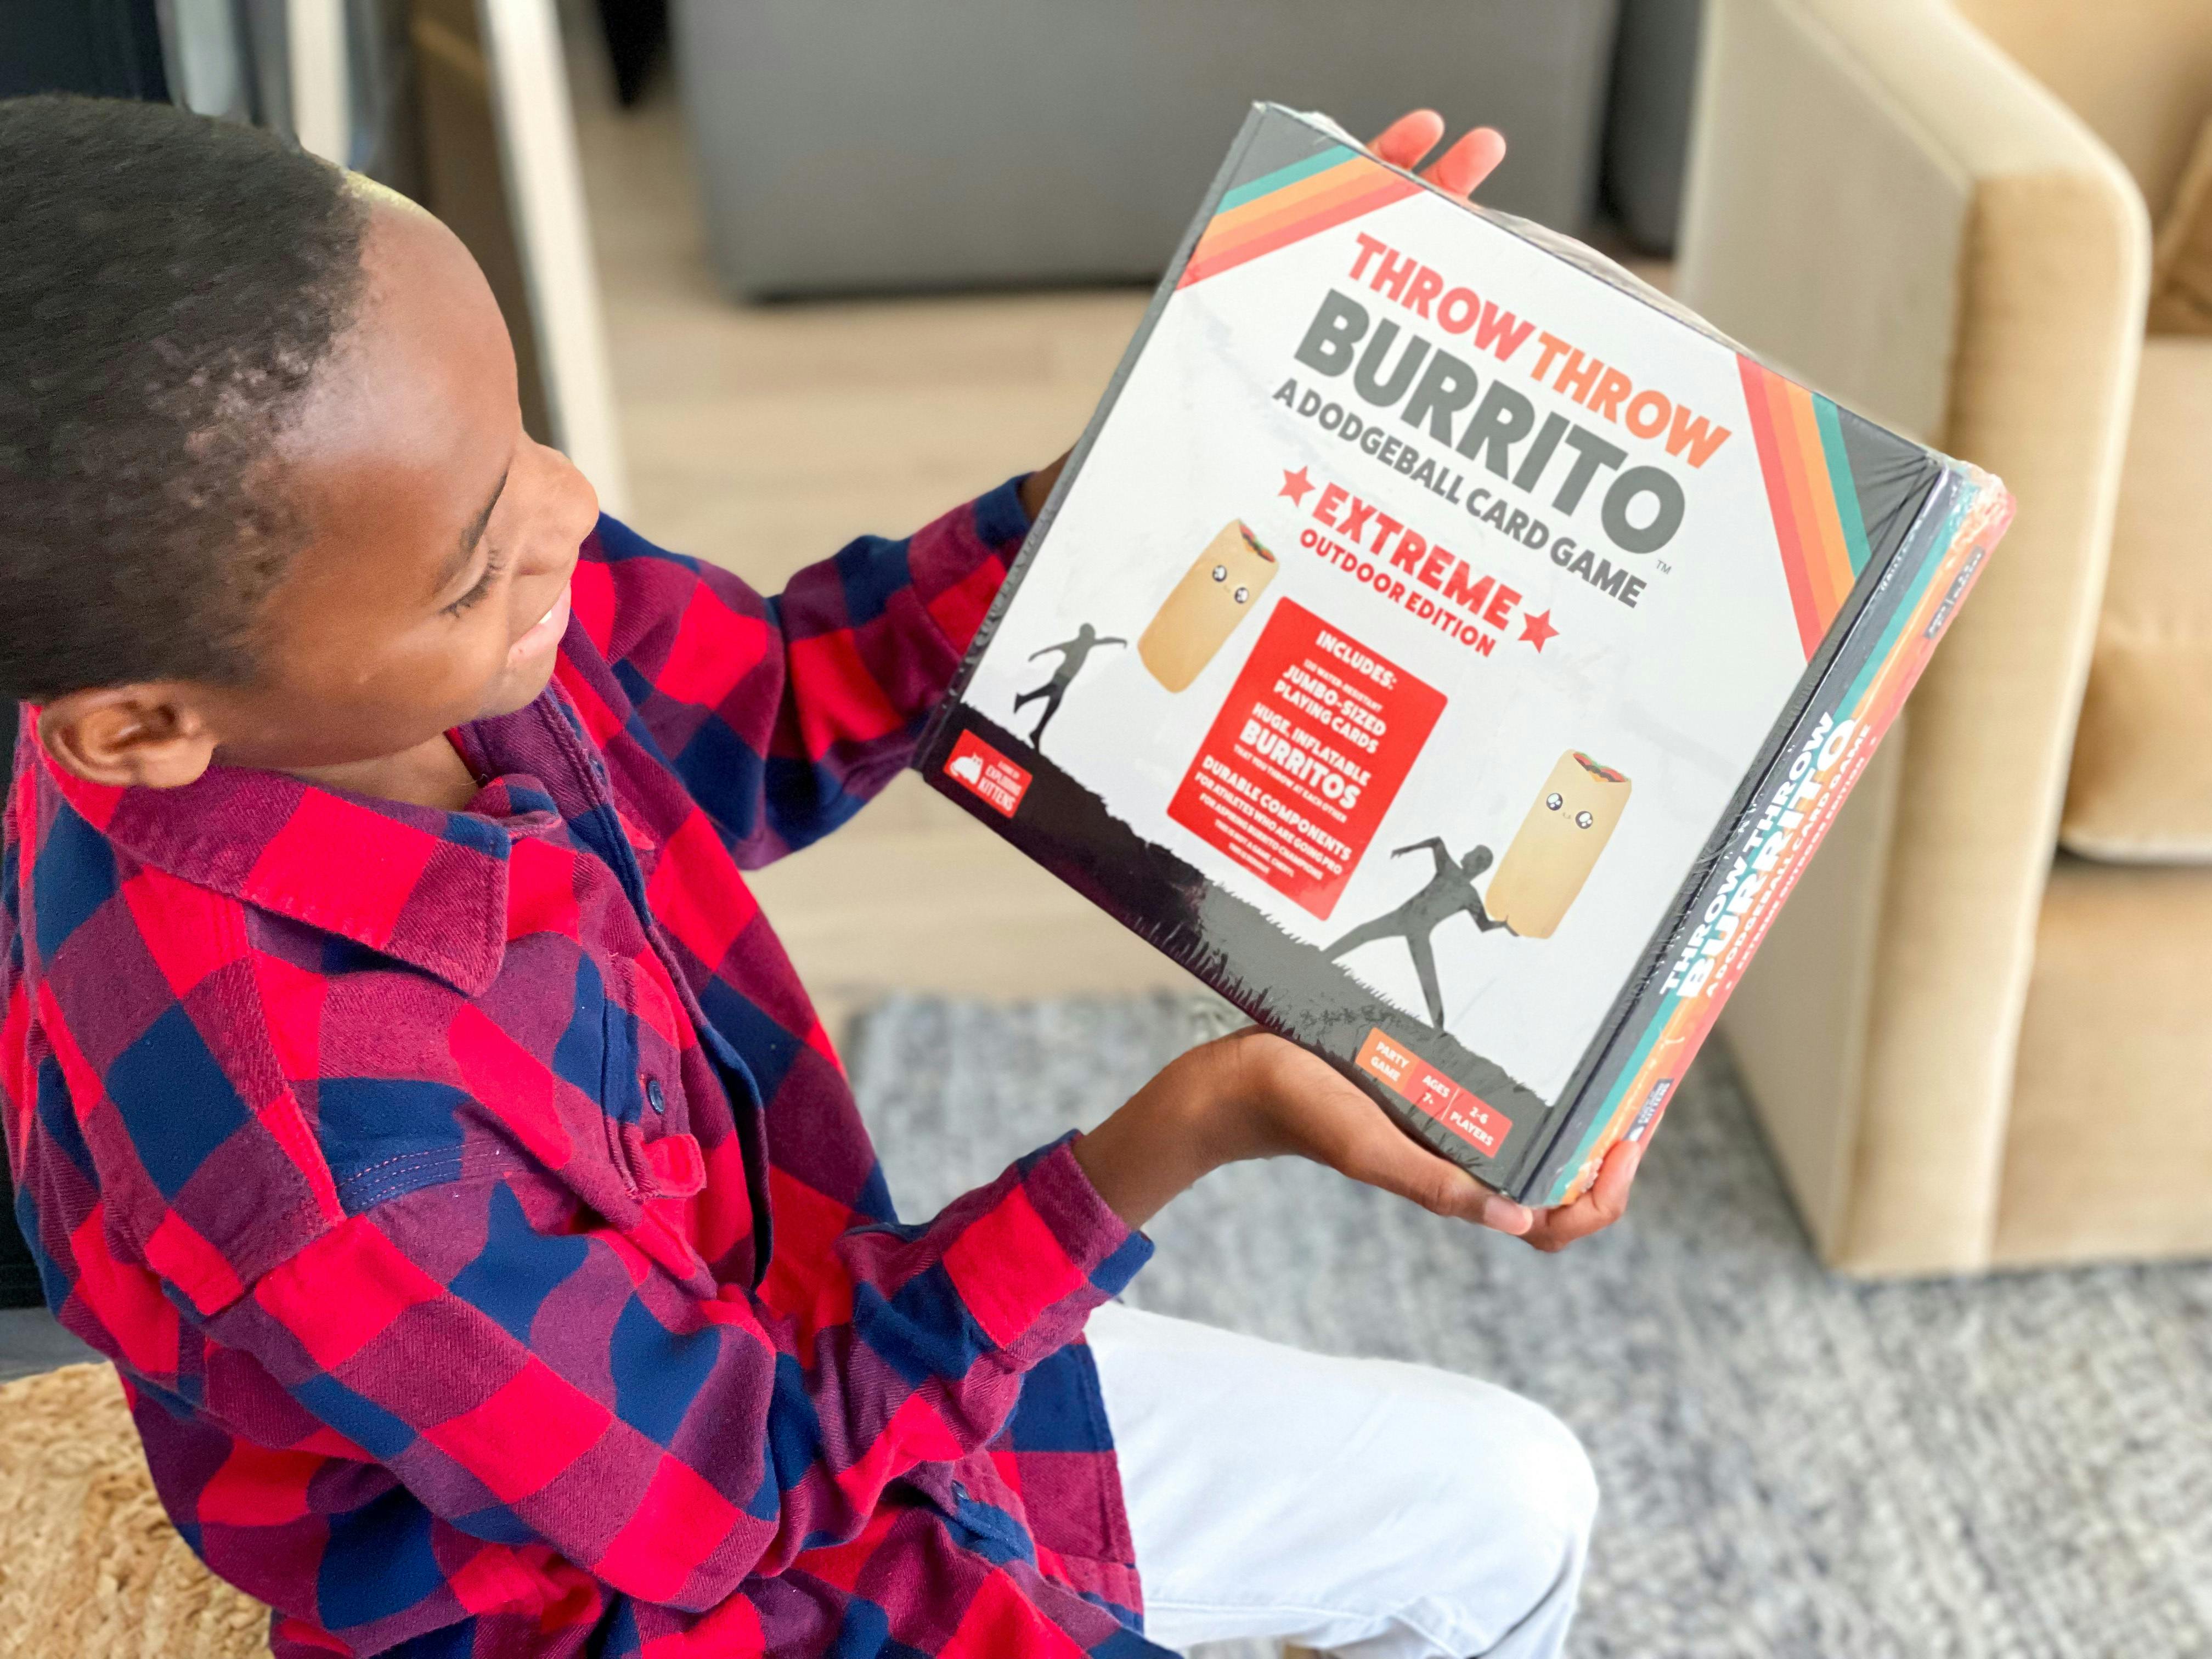 A young boy looking at the box of a Throw Throw Burrito game.